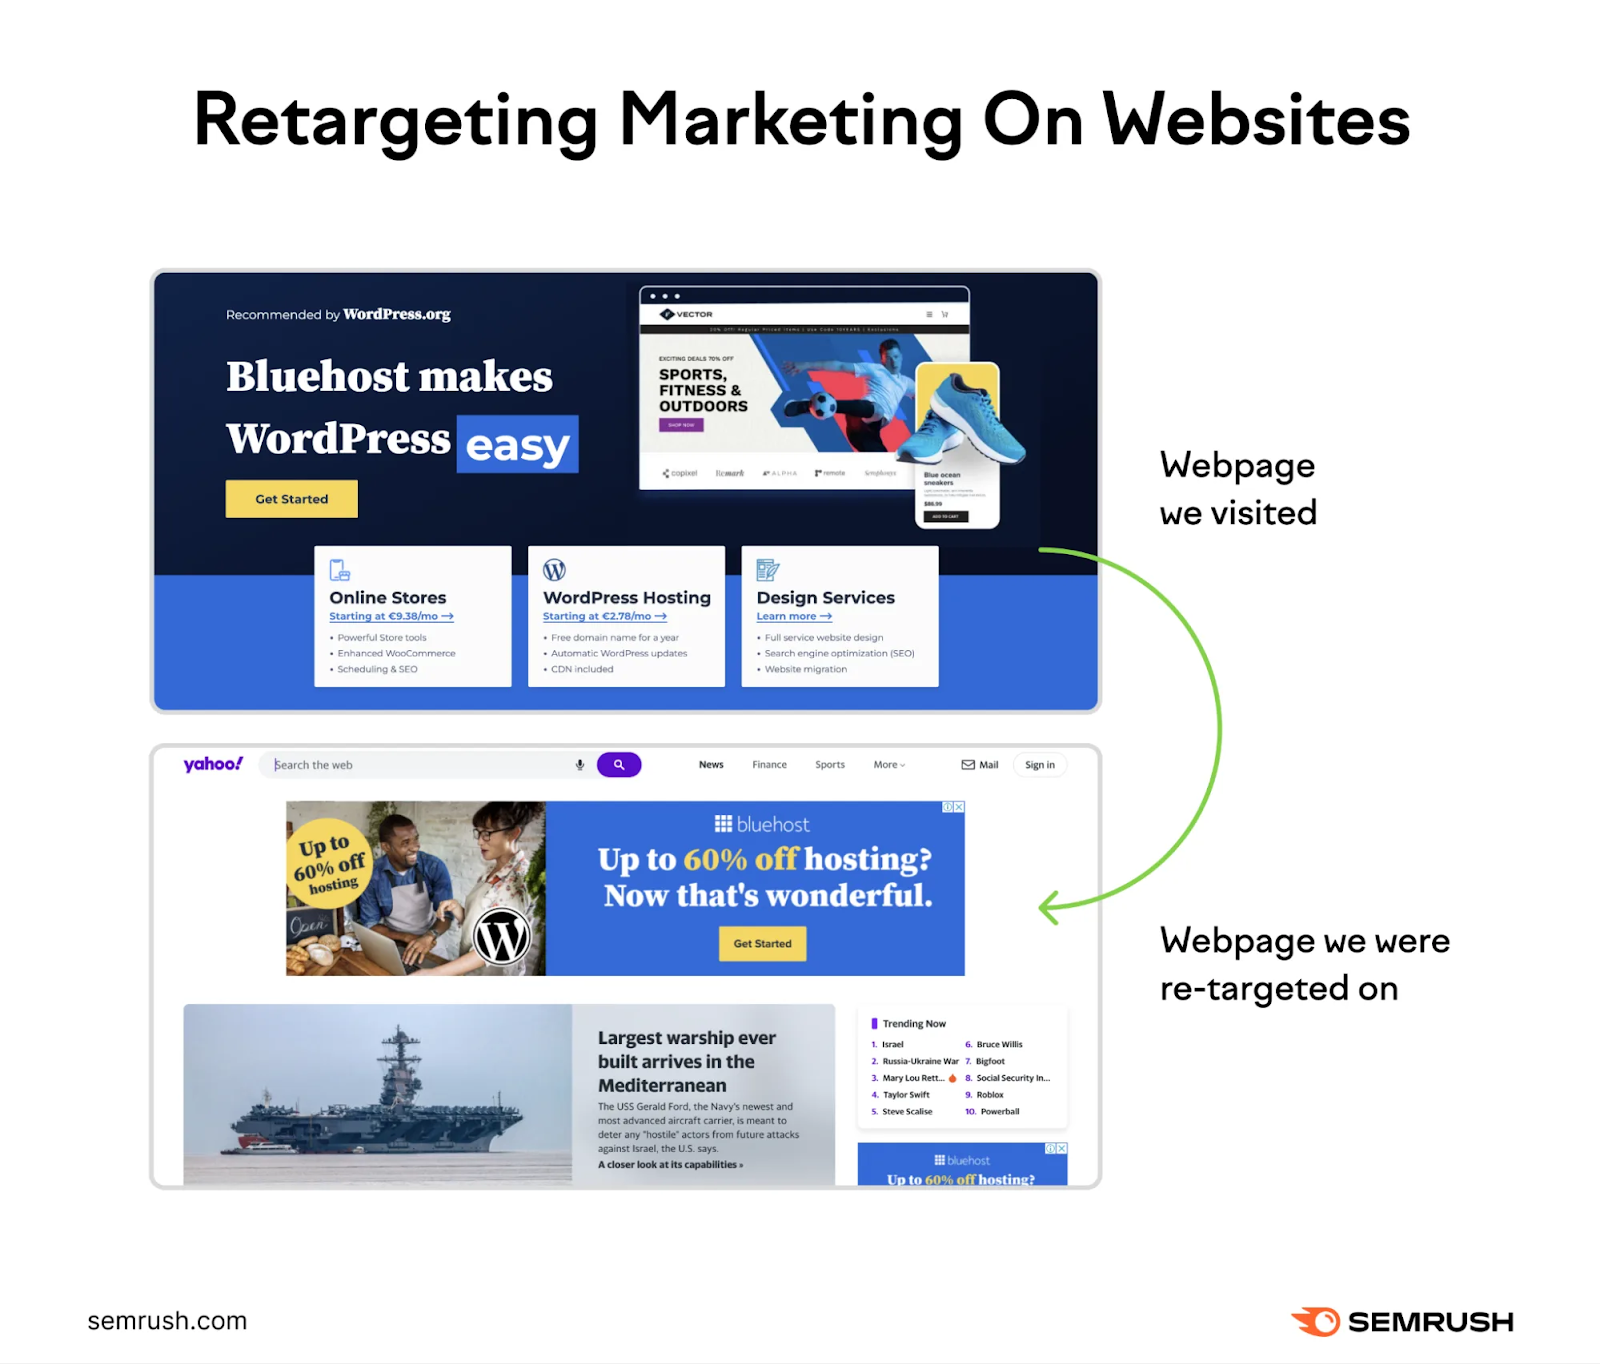 An infographic showing an example of retargeting marketing on websites